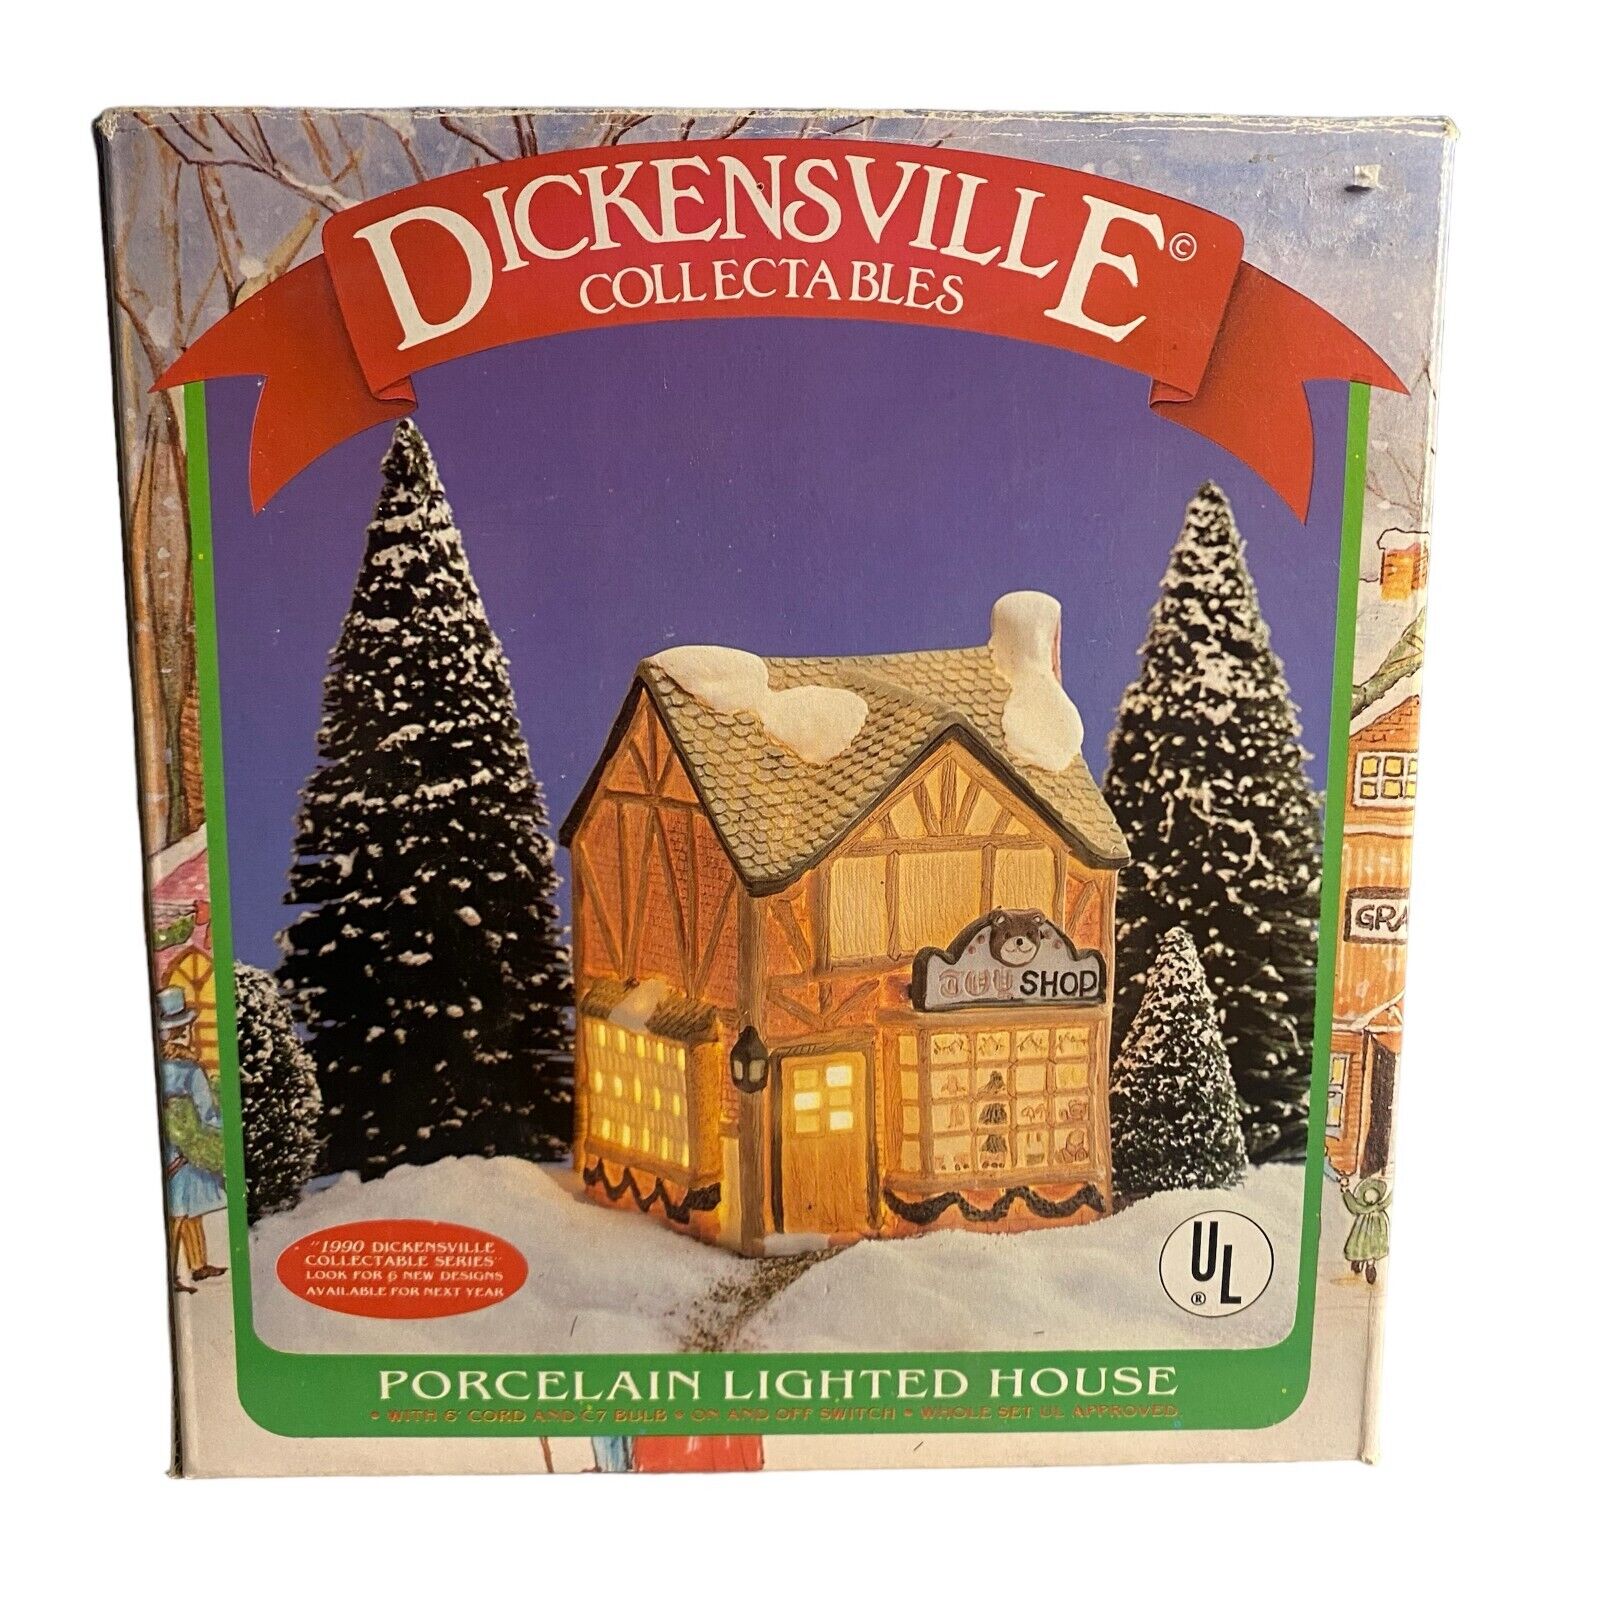 1989 Dickensville Porcelain Lighted House (TOY SHOP)